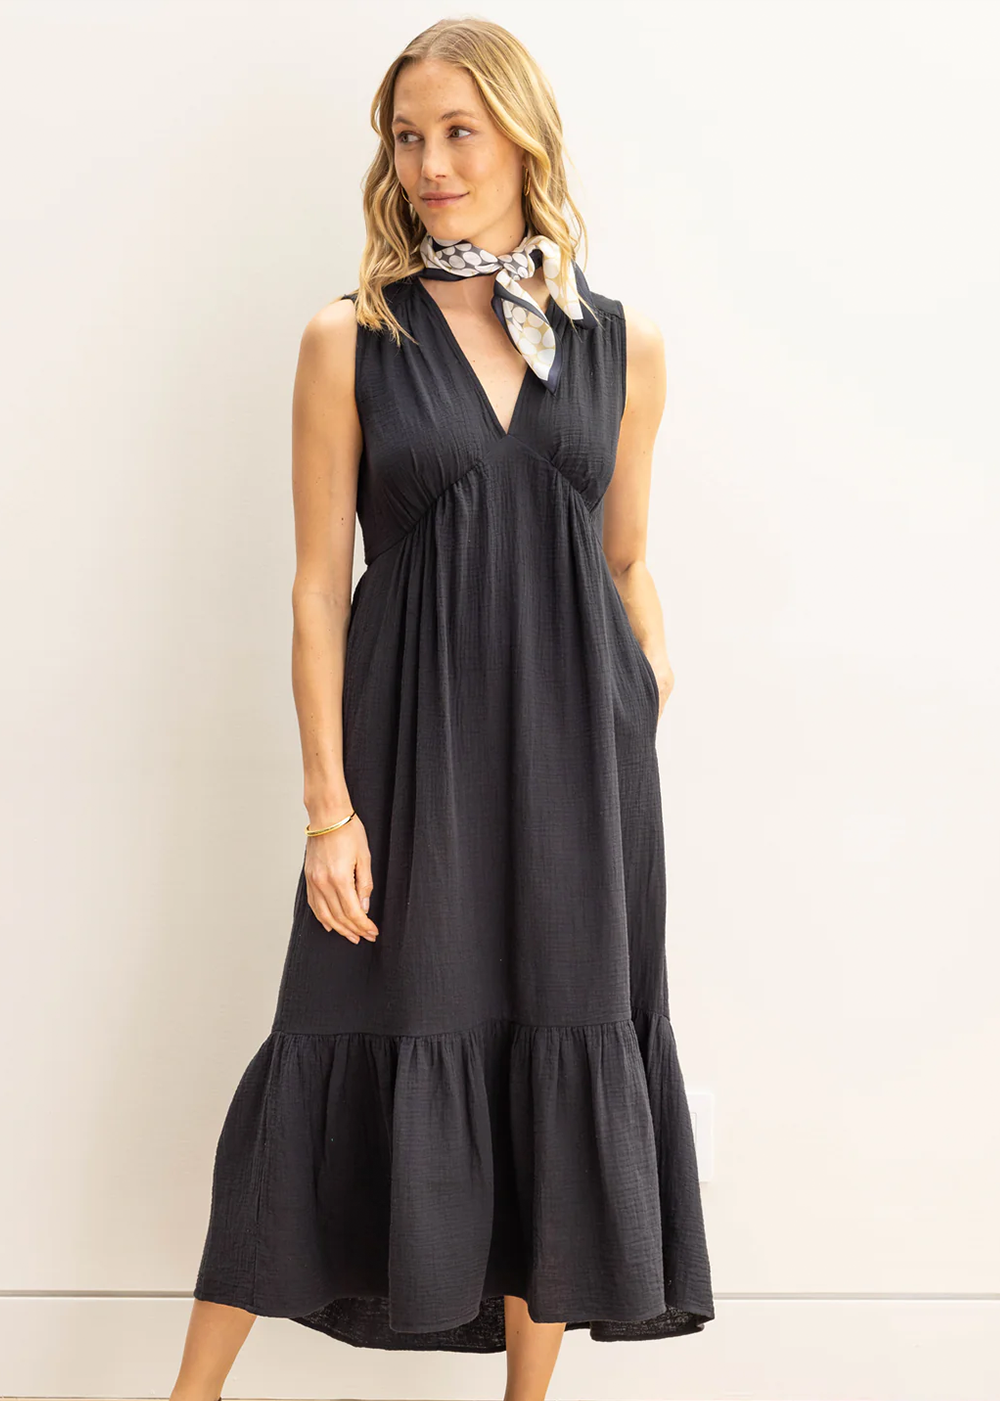 Female model wearing a black sleeveless maxi dress from Echo New York. Dress features super soft cotton, a relaxed fit with a modern silhouette. Length stops just above the ankles.